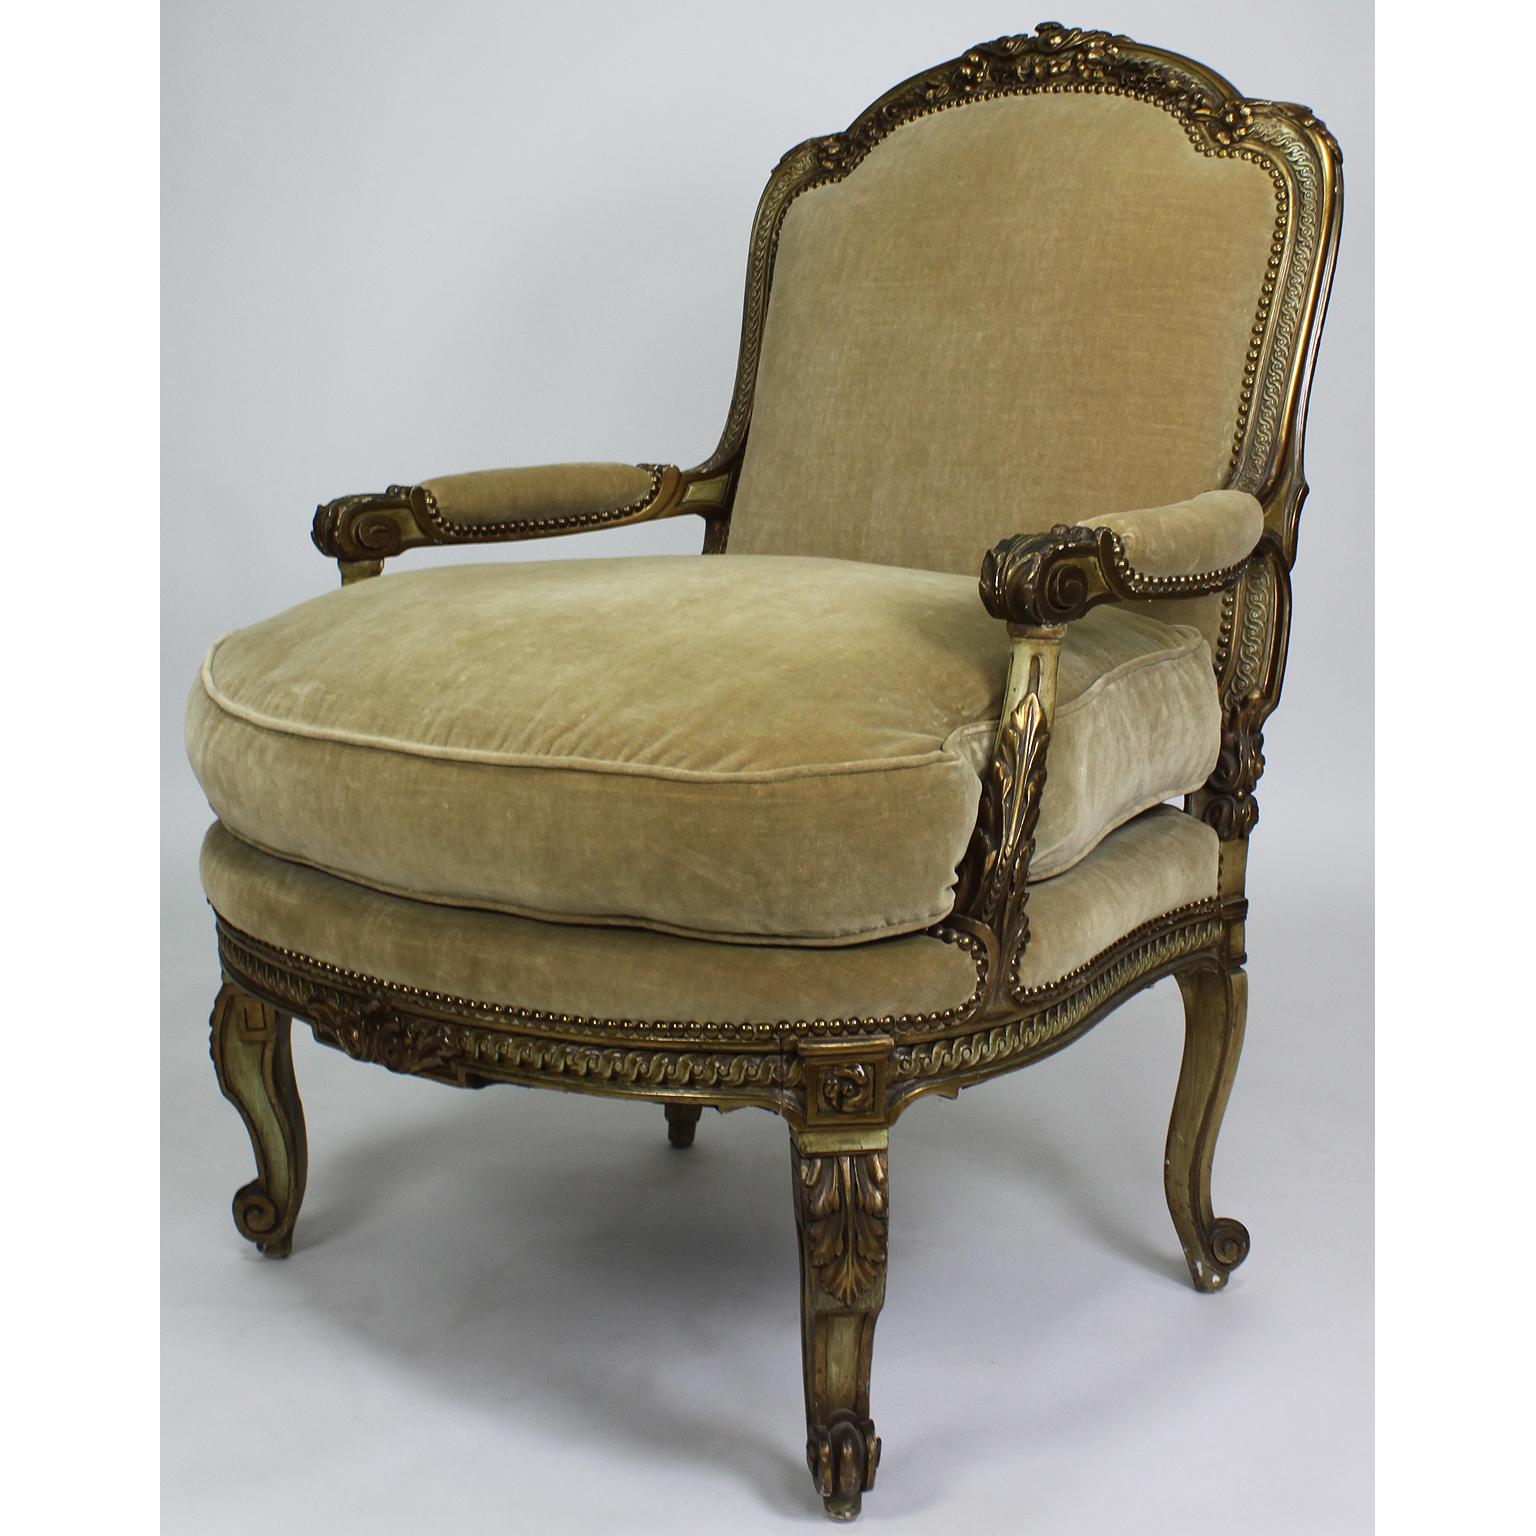 A fine pair of French Louis XV style gilt and green-cream painted carved Fauteuils armchairs, attributed to Maison Jansen. The arched back frame crowned with carvings of flowers with open arm rests and raised on cabriolet legs and fitted with a